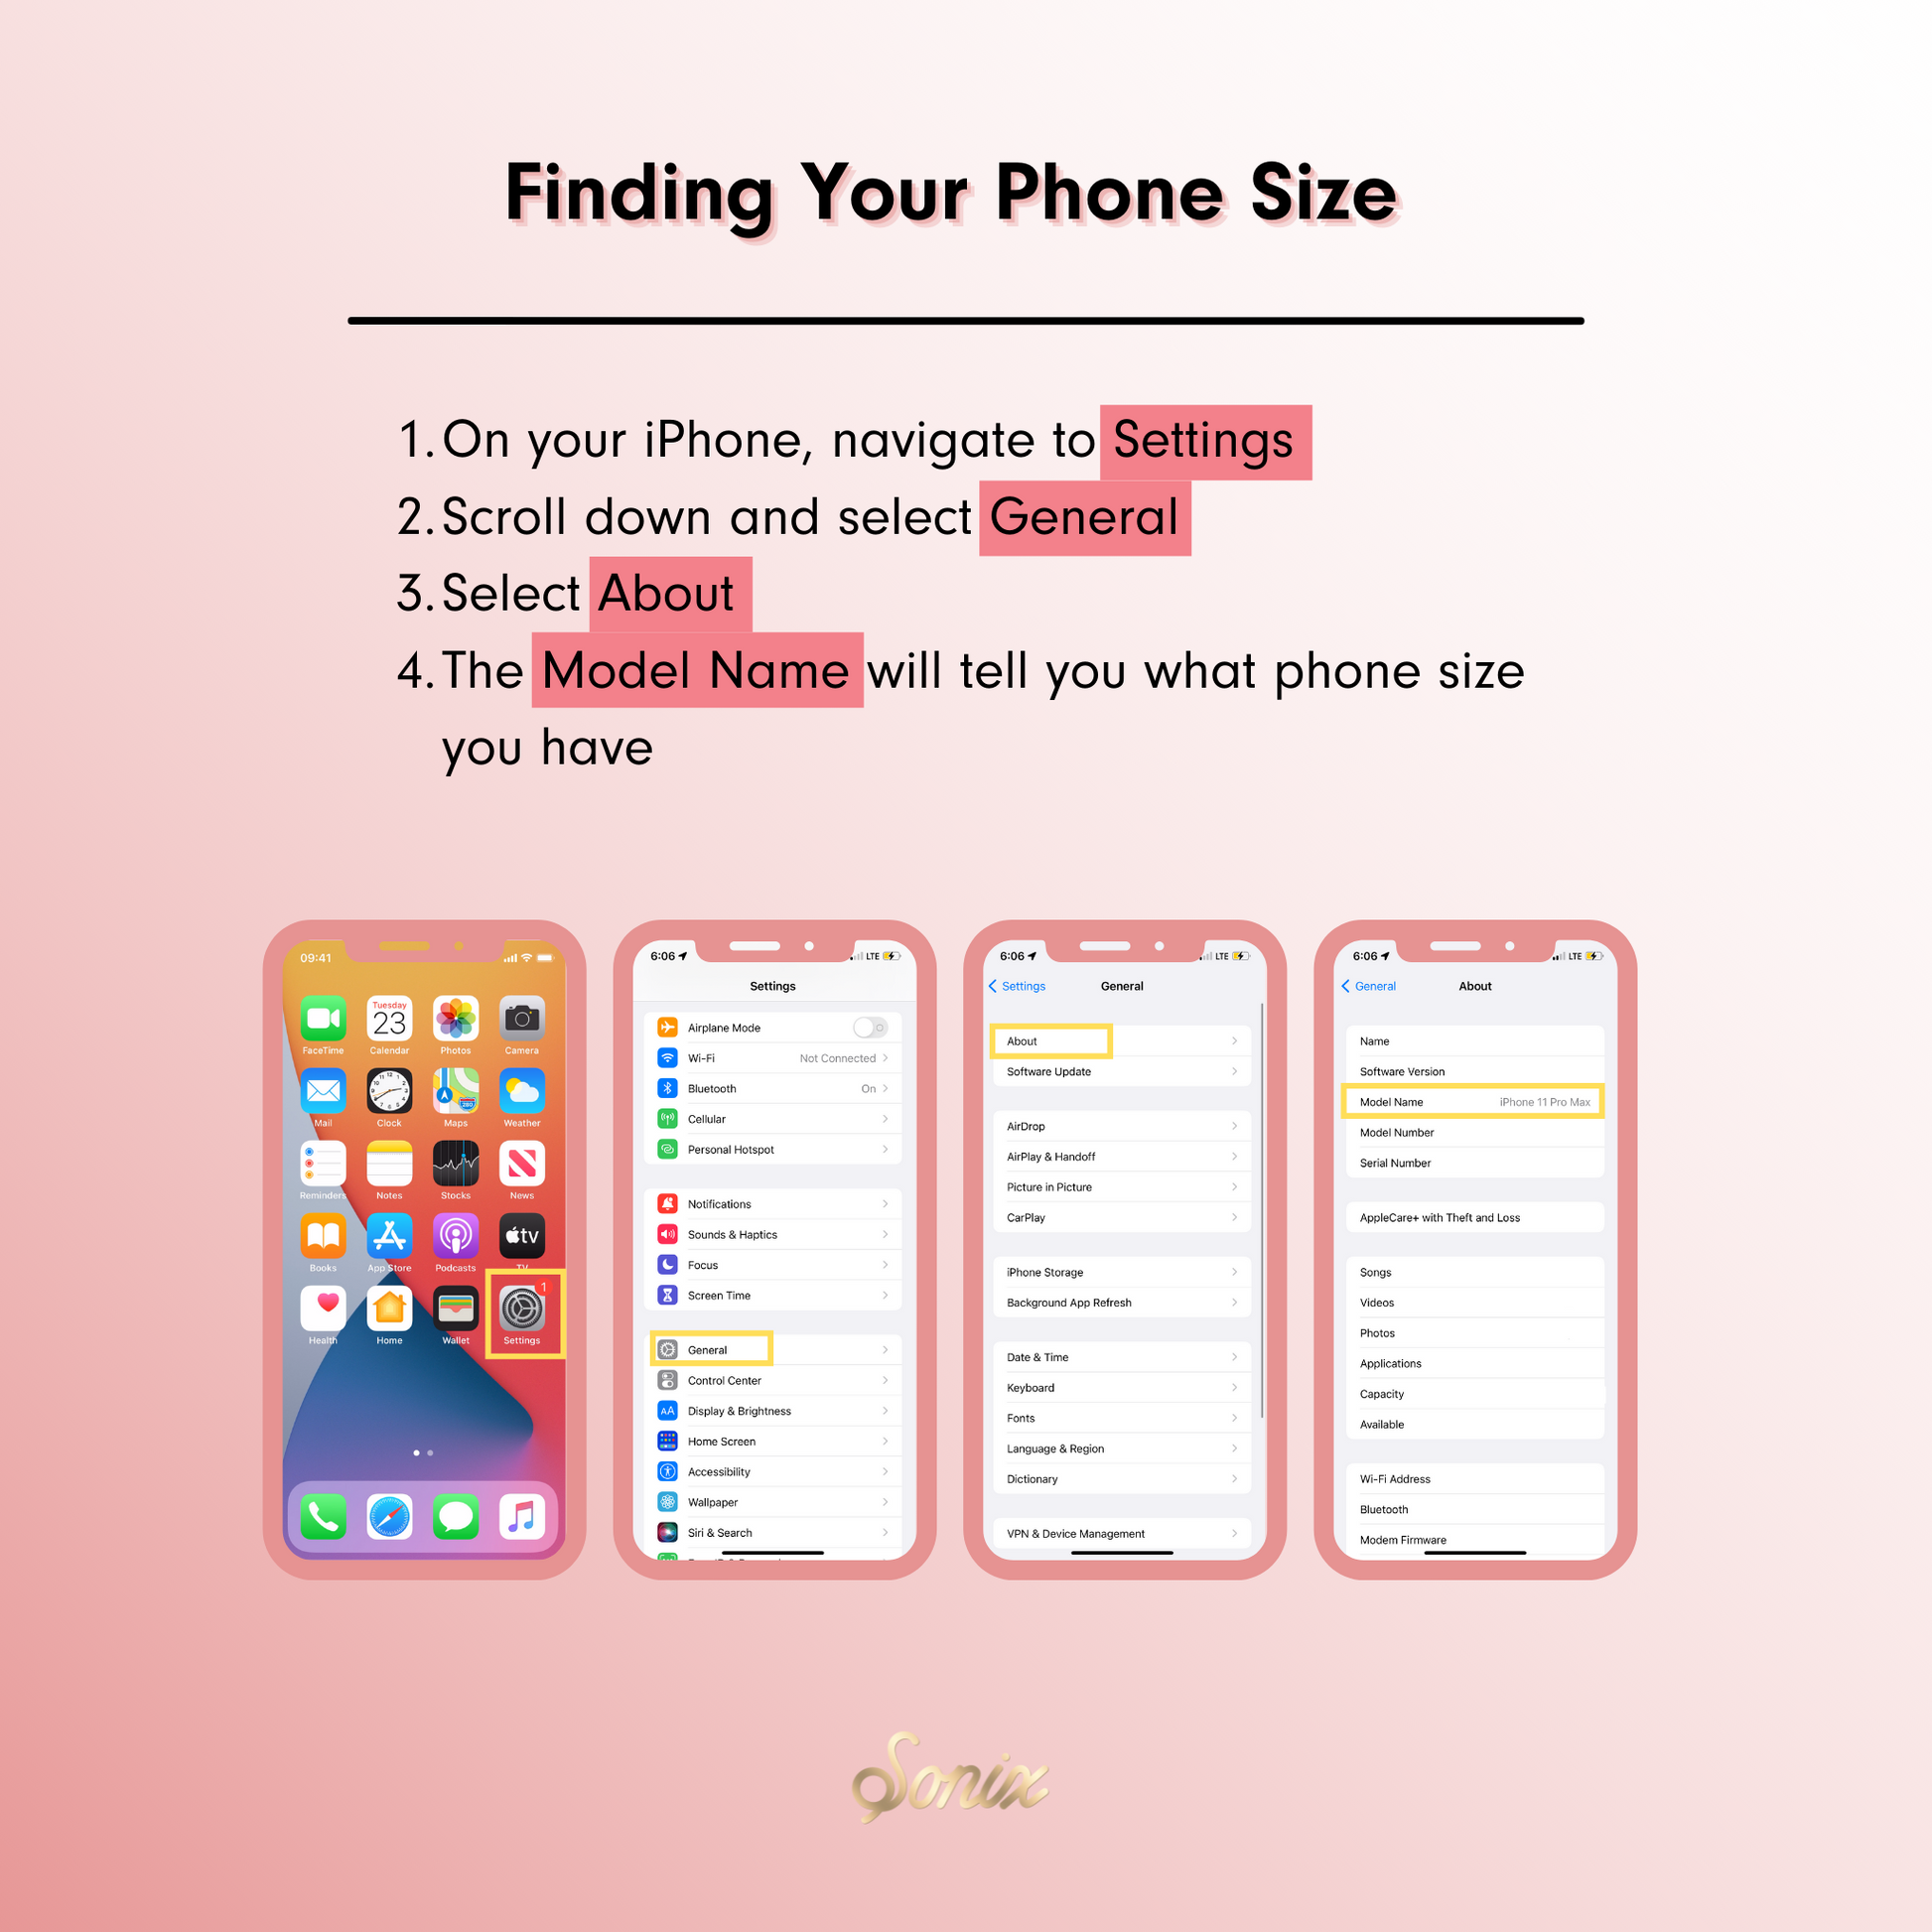 info graphic on how to find your phone size